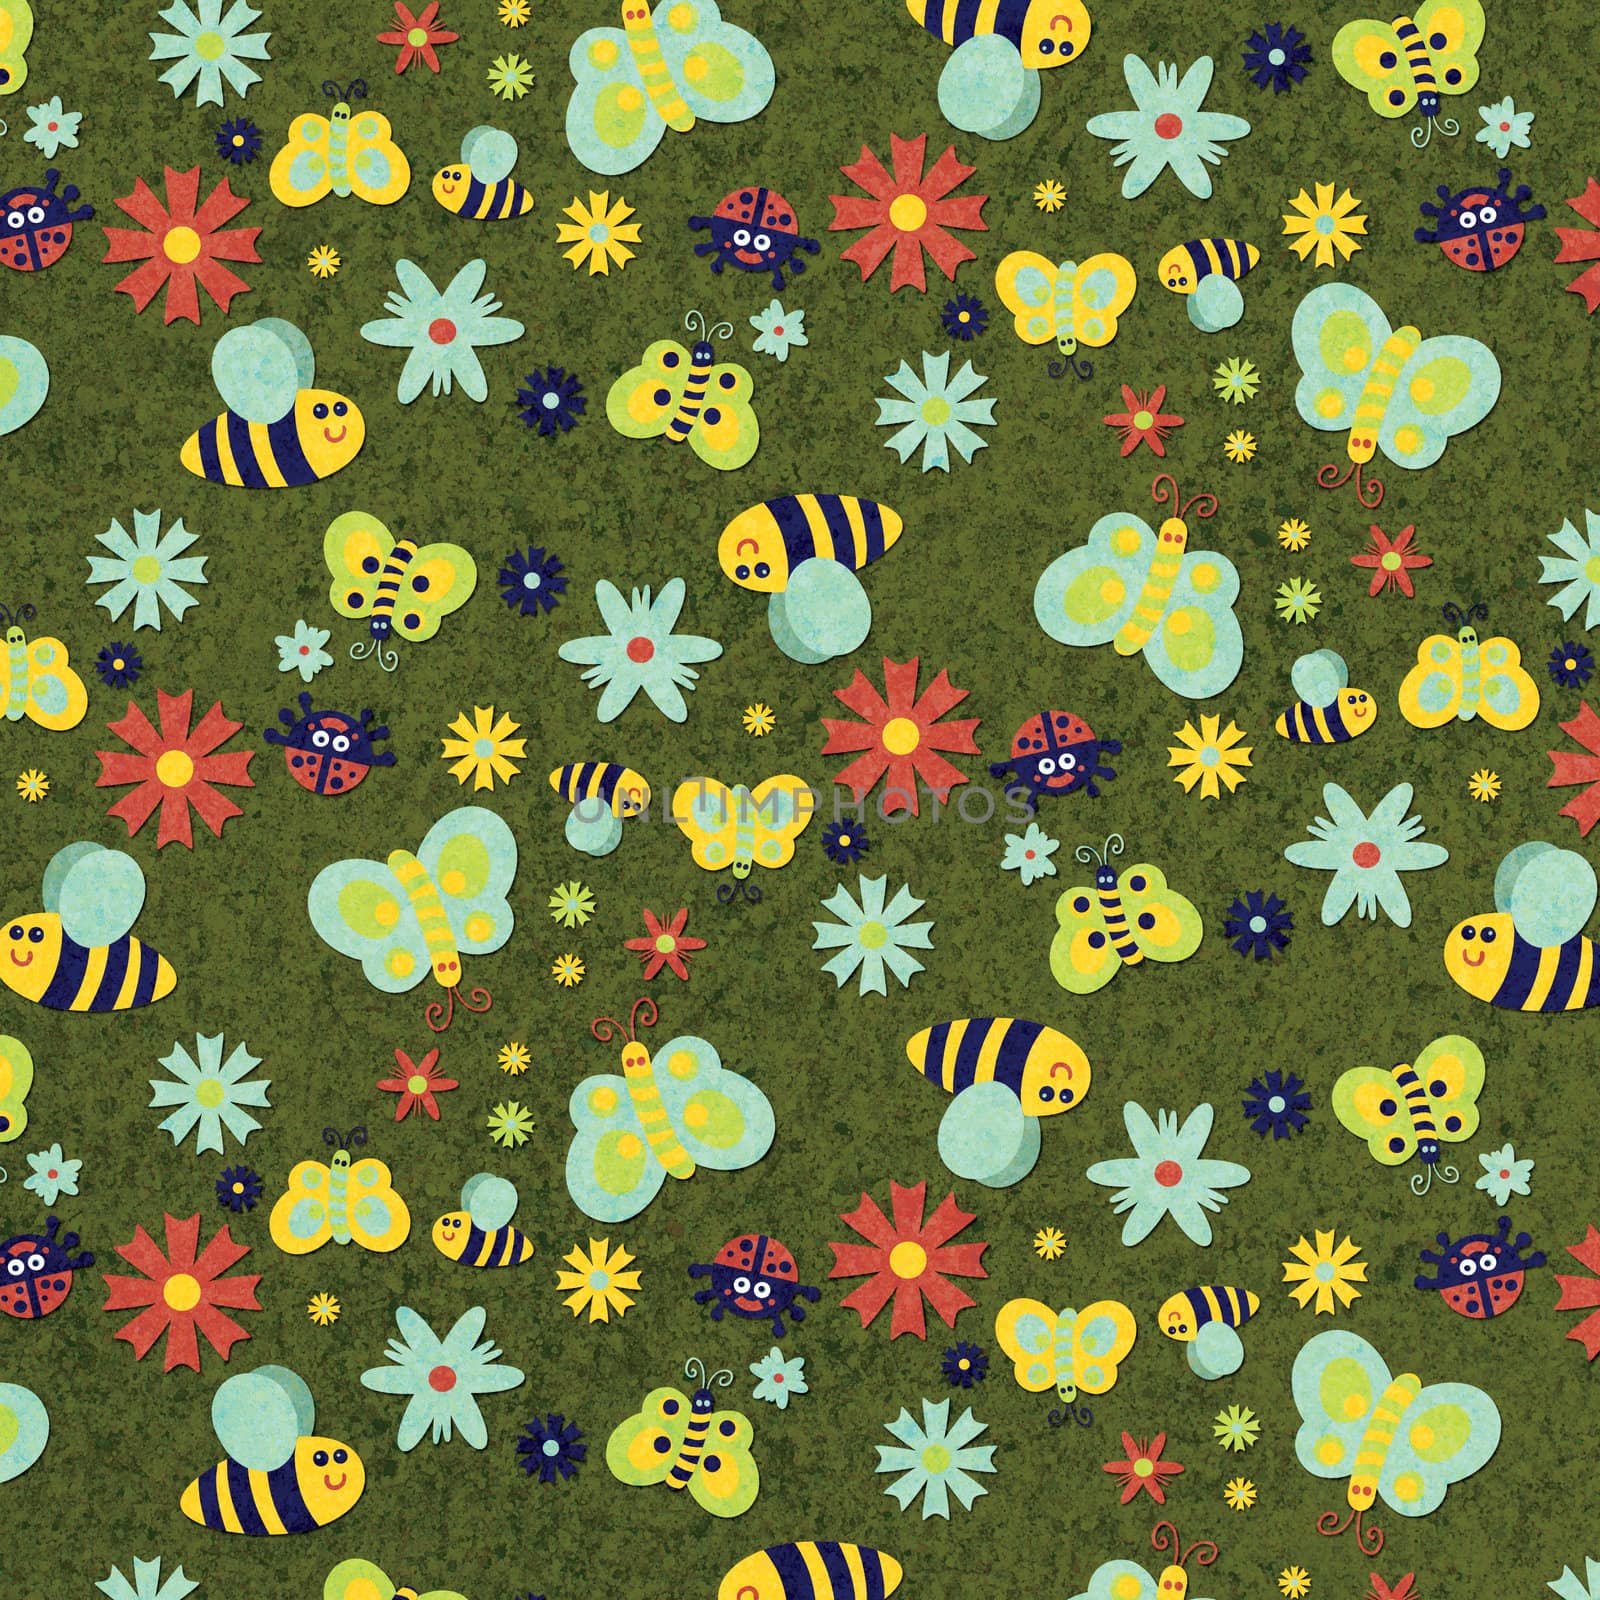 Summer Pattern by mary981